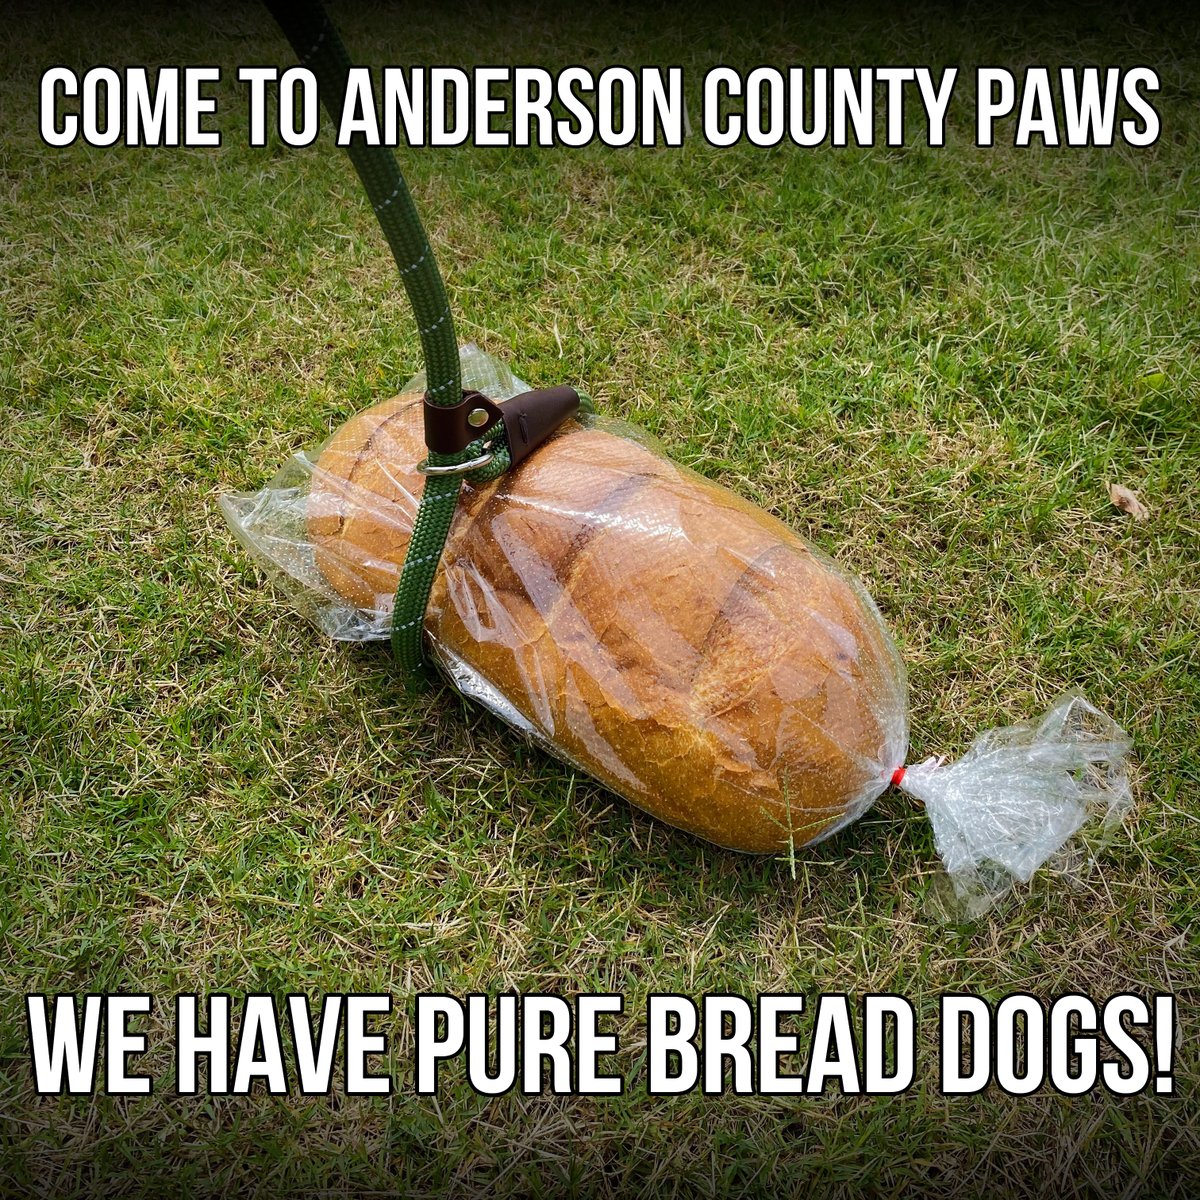 They're house trained, don't bark, and they even know how to 'roll-loaf-er'! 😂😂😂

#AndersonCountyPAWS #animalshelter #joke #badpun #PureBreadDog #southcarolina #anderson